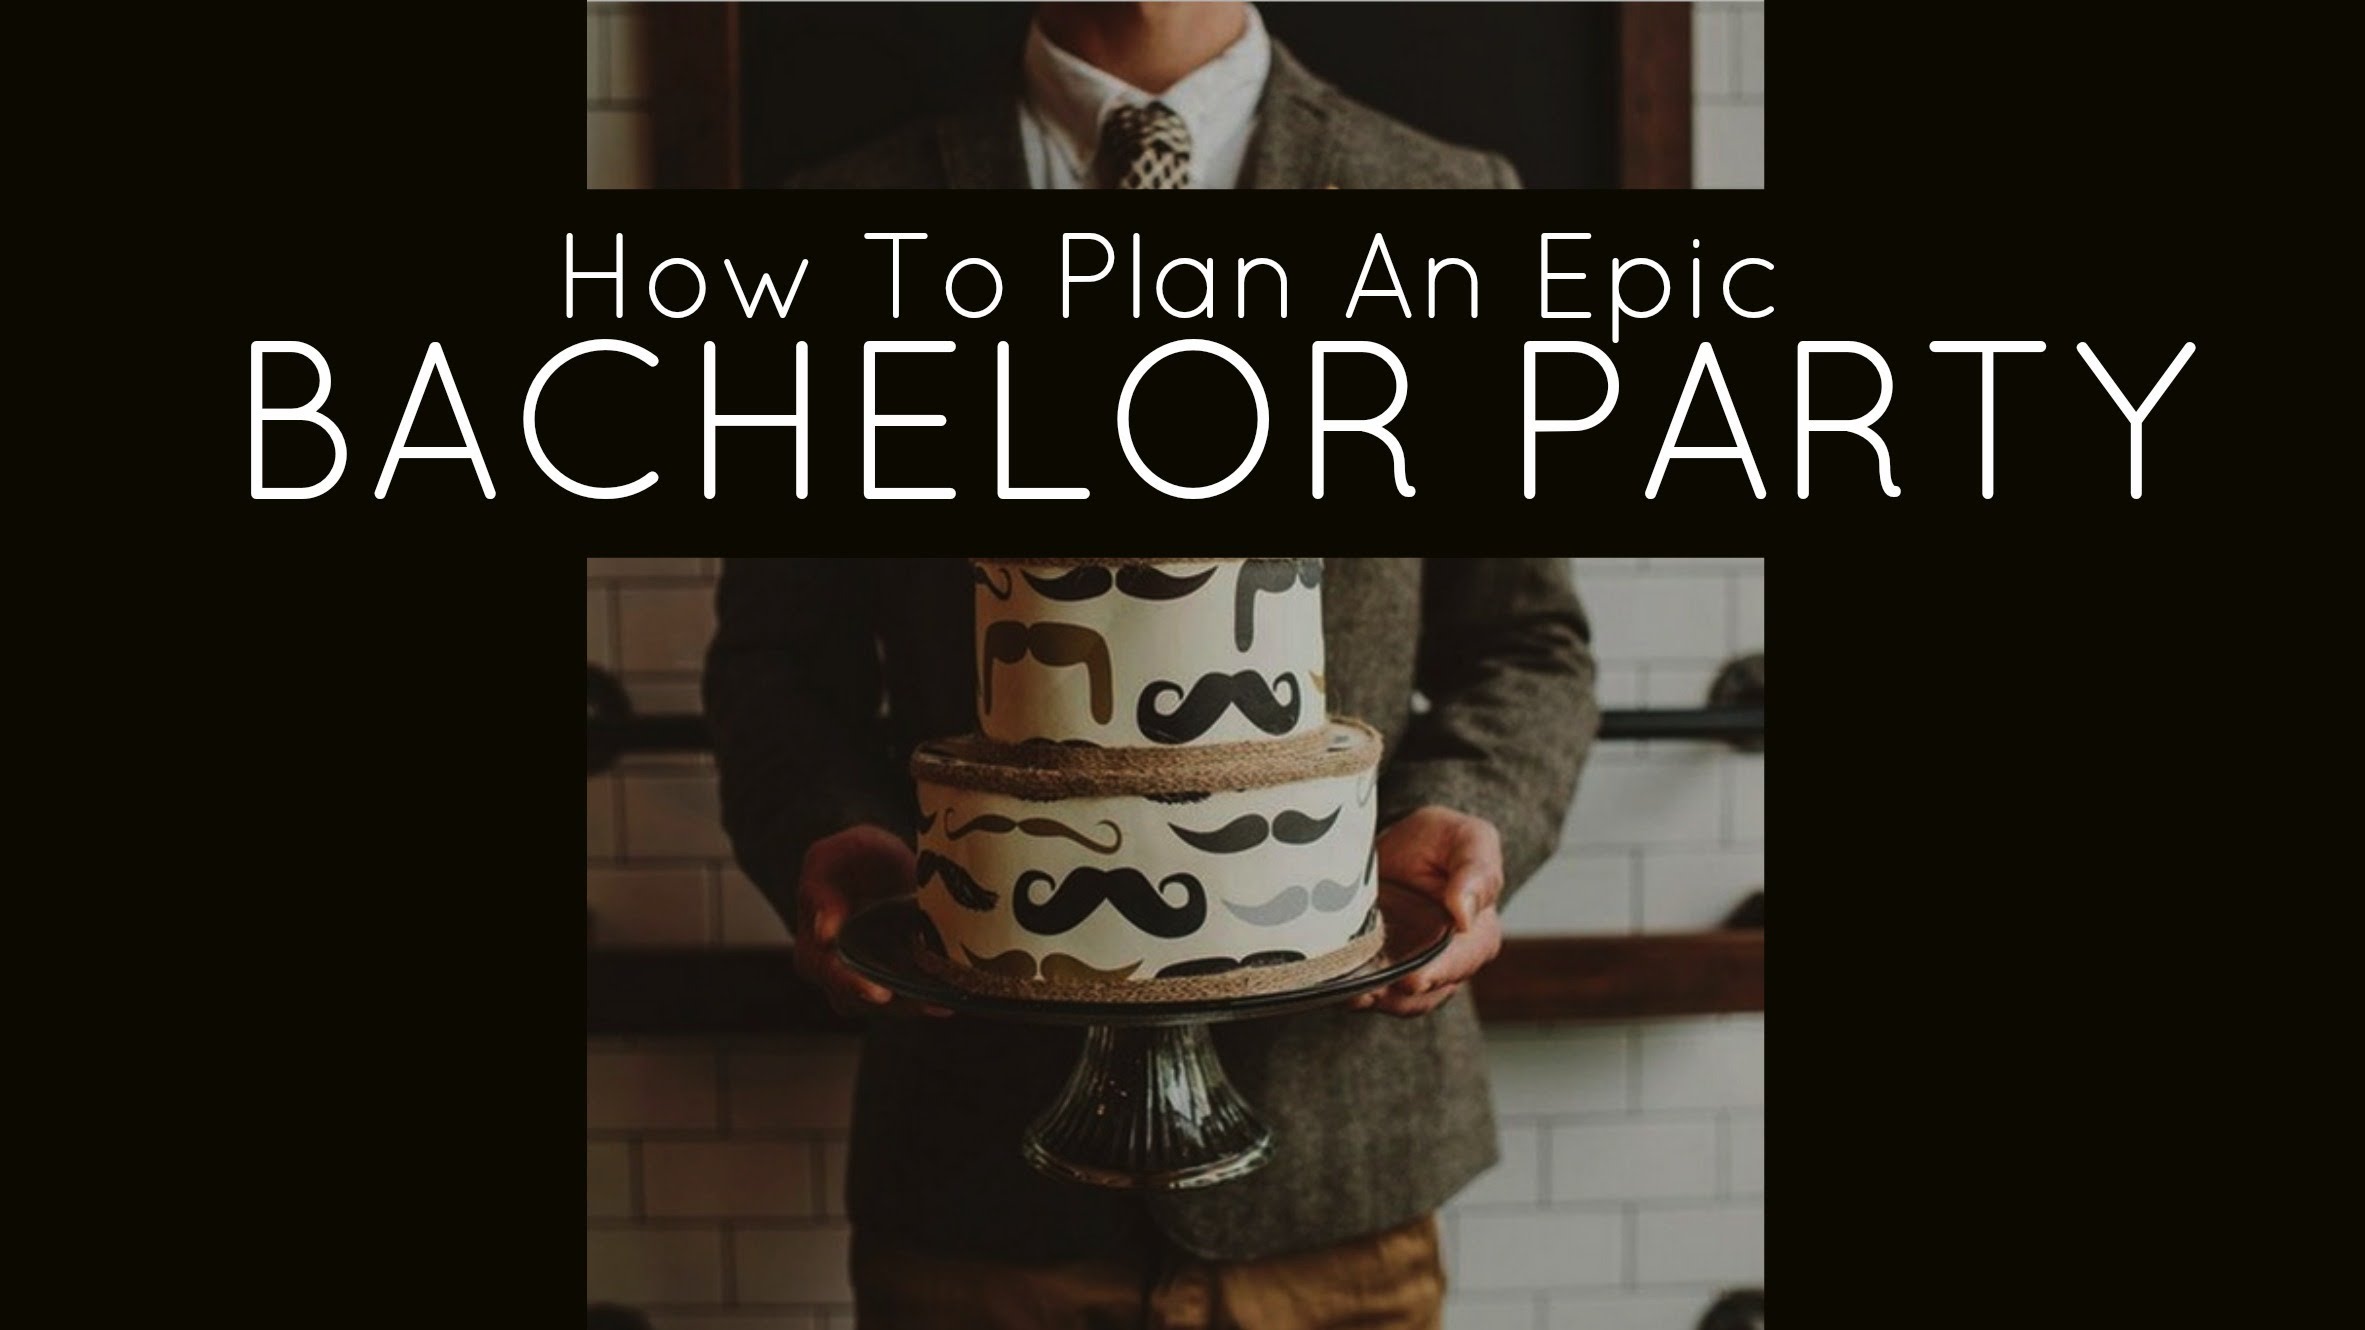 How to plan a Bachelor Party, Bachelor Party Ideas, Bachelor Party Plans, Planning a Bachelor Party,